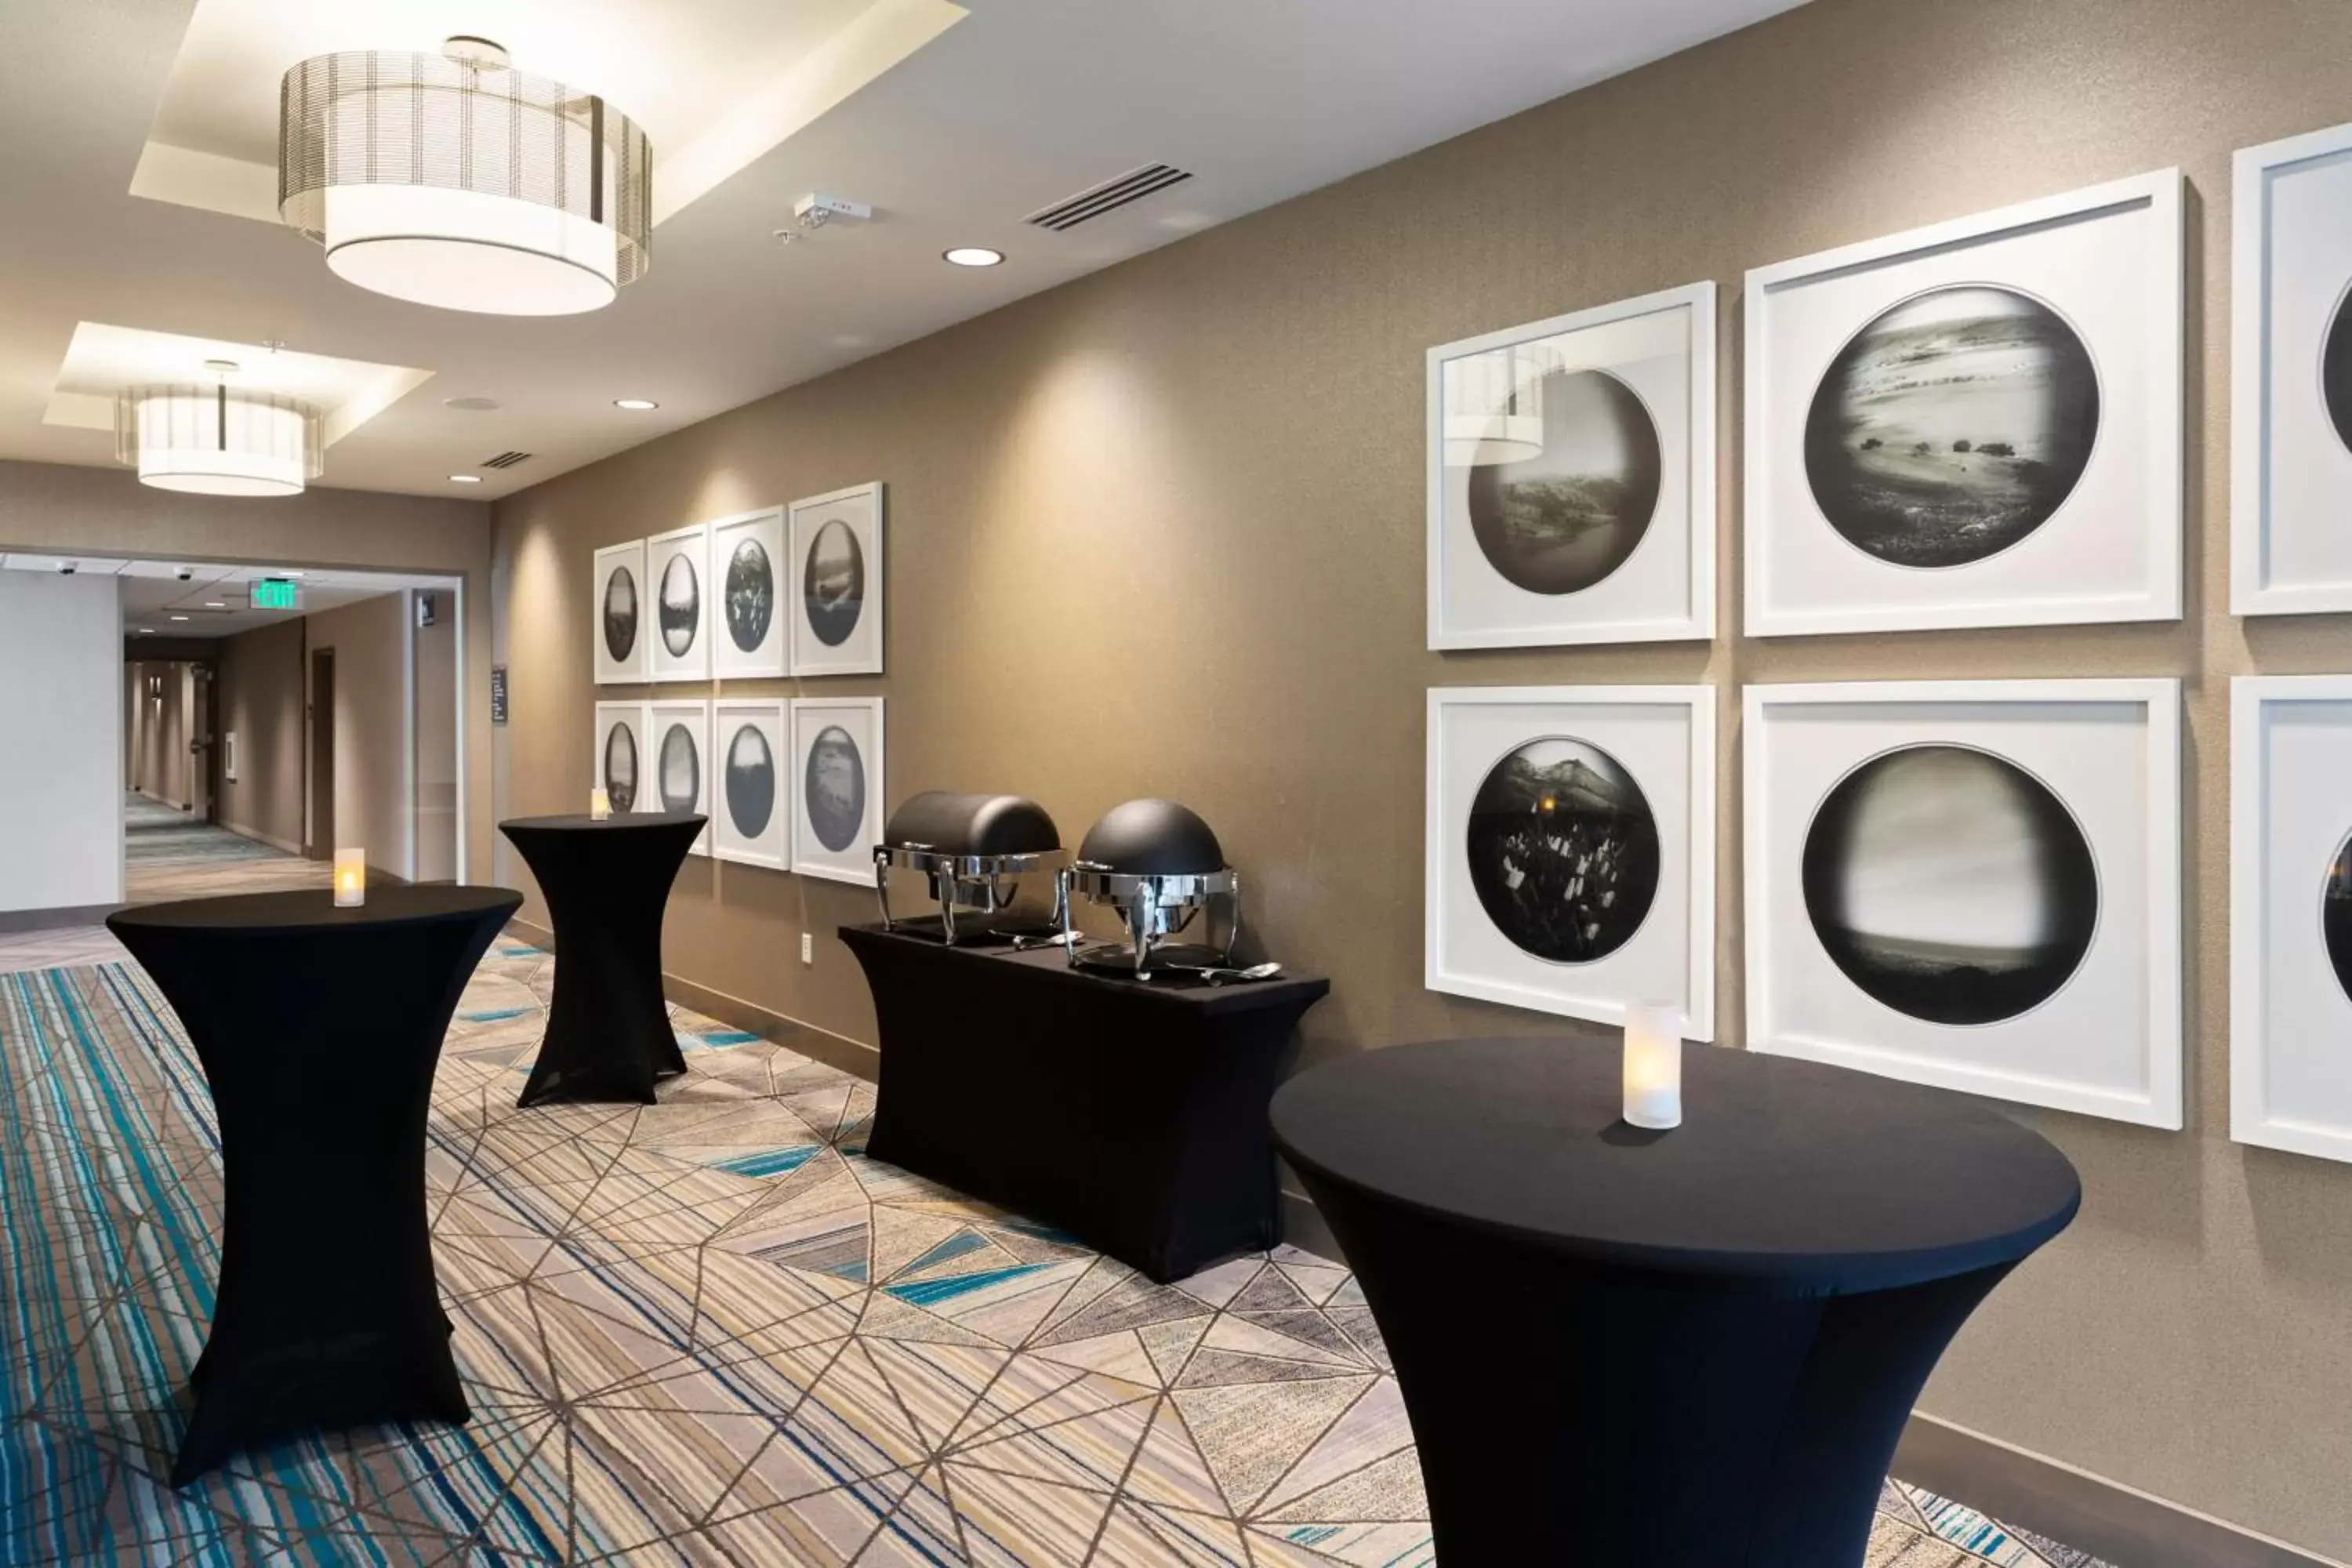 Meeting/conference room in Fairfield Inn & Suites by Marriott San Jose North/Silicon Valley